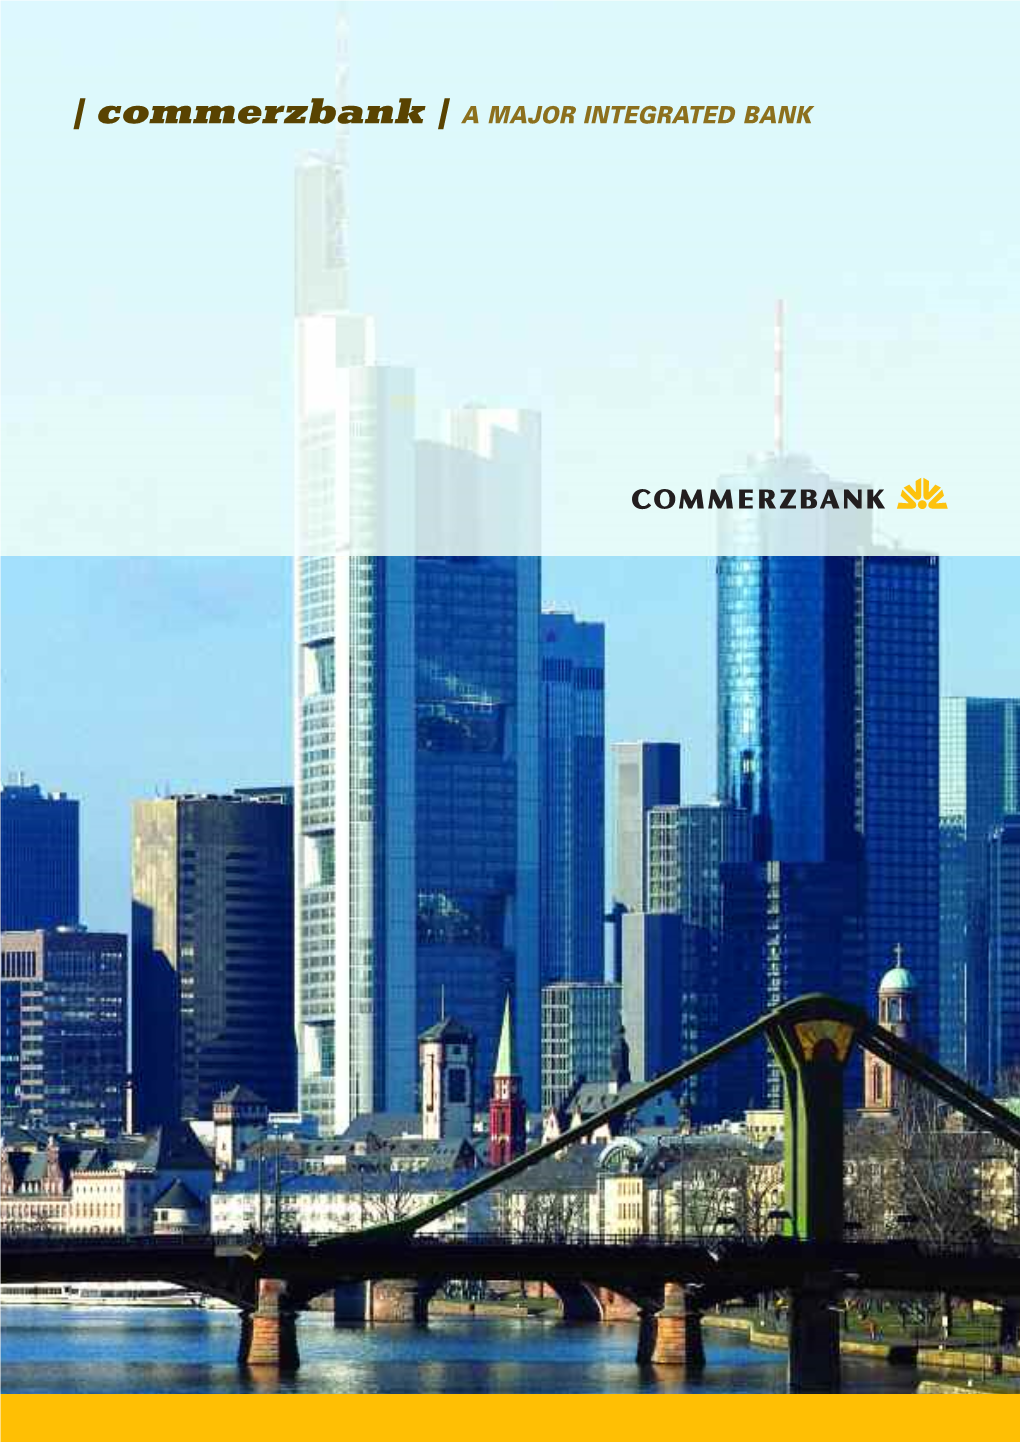 COMMERZBANK PROFILE 2006 ‡ Highlights of Commerzbank Group ‡